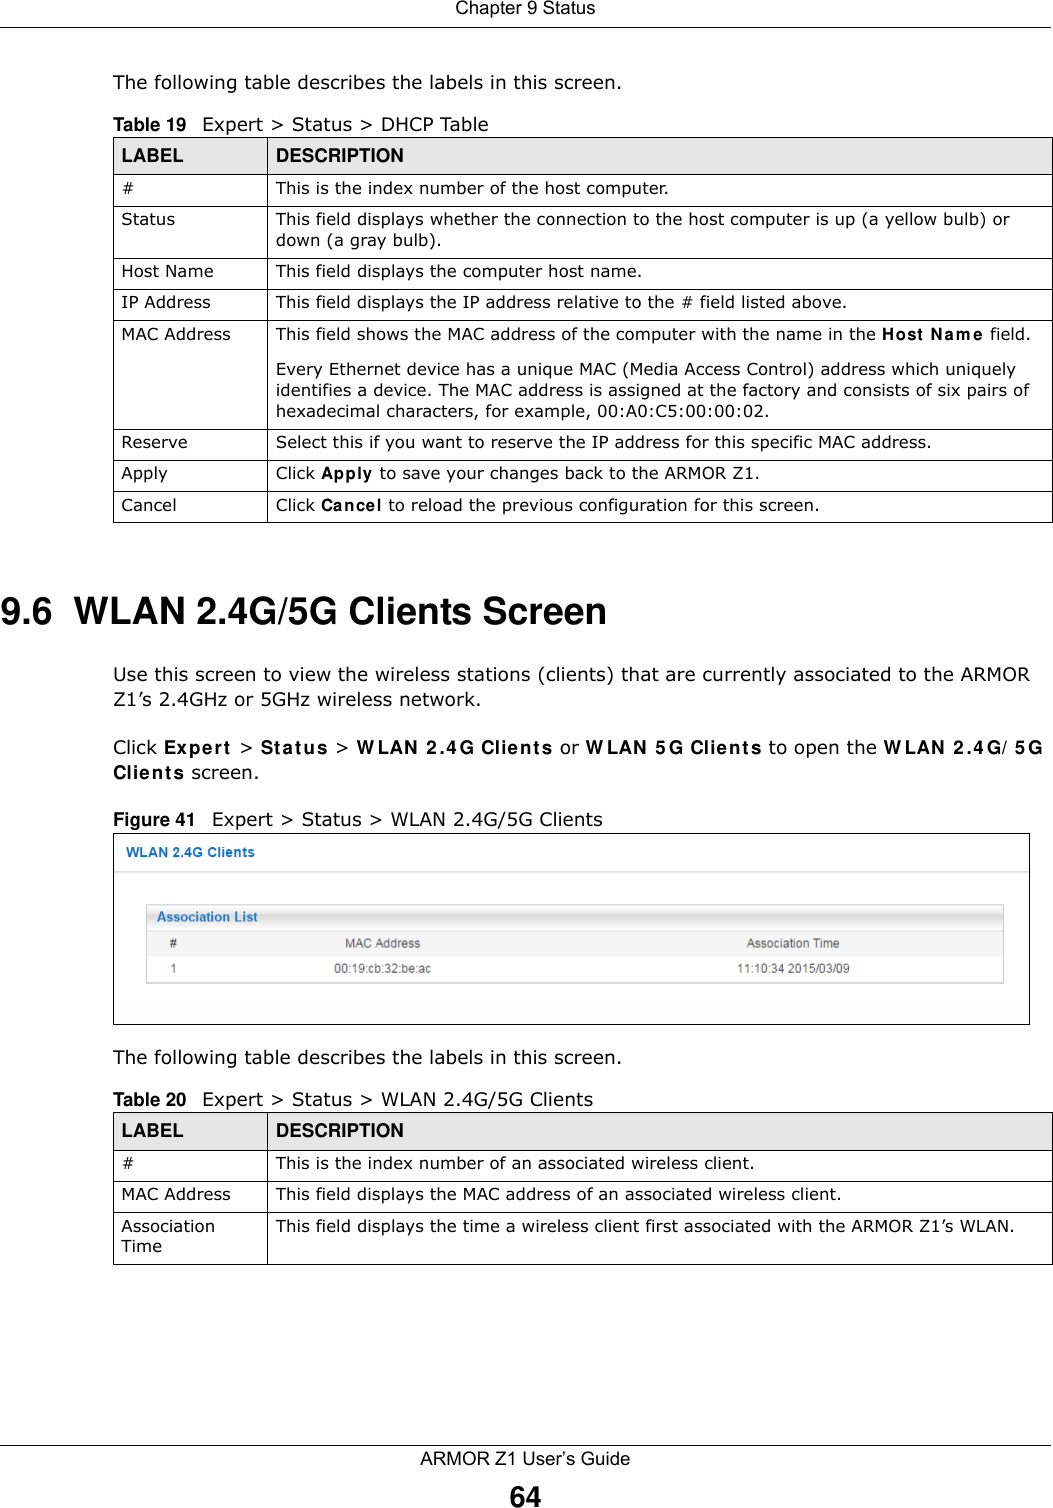 Chapter 9 StatusARMOR Z1 User’s Guide64The following table describes the labels in this screen.9.6  WLAN 2.4G/5G Clients ScreenUse this screen to view the wireless stations (clients) that are currently associated to the ARMOR Z1’s 2.4GHz or 5GHz wireless network.Click Expert &gt; Status &gt; WLAN 2.4G Clients or WLAN 5G Clients to open the WLAN 2.4G/5G Clients screen.Figure 41   Expert &gt; Status &gt; WLAN 2.4G/5G ClientsThe following table describes the labels in this screen.Table 19   Expert &gt; Status &gt; DHCP TableLABEL  DESCRIPTION#  This is the index number of the host computer.Status This field displays whether the connection to the host computer is up (a yellow bulb) or down (a gray bulb).Host Name This field displays the computer host name.IP Address This field displays the IP address relative to the # field listed above.MAC Address This field shows the MAC address of the computer with the name in the Host Name field.Every Ethernet device has a unique MAC (Media Access Control) address which uniquely identifies a device. The MAC address is assigned at the factory and consists of six pairs of hexadecimal characters, for example, 00:A0:C5:00:00:02.Reserve Select this if you want to reserve the IP address for this specific MAC address.Apply Click Apply to save your changes back to the ARMOR Z1.Cancel Click Cancel to reload the previous configuration for this screen.Table 20   Expert &gt; Status &gt; WLAN 2.4G/5G ClientsLABEL  DESCRIPTION#  This is the index number of an associated wireless client. MAC Address This field displays the MAC address of an associated wireless client.Association TimeThis field displays the time a wireless client first associated with the ARMOR Z1’s WLAN.